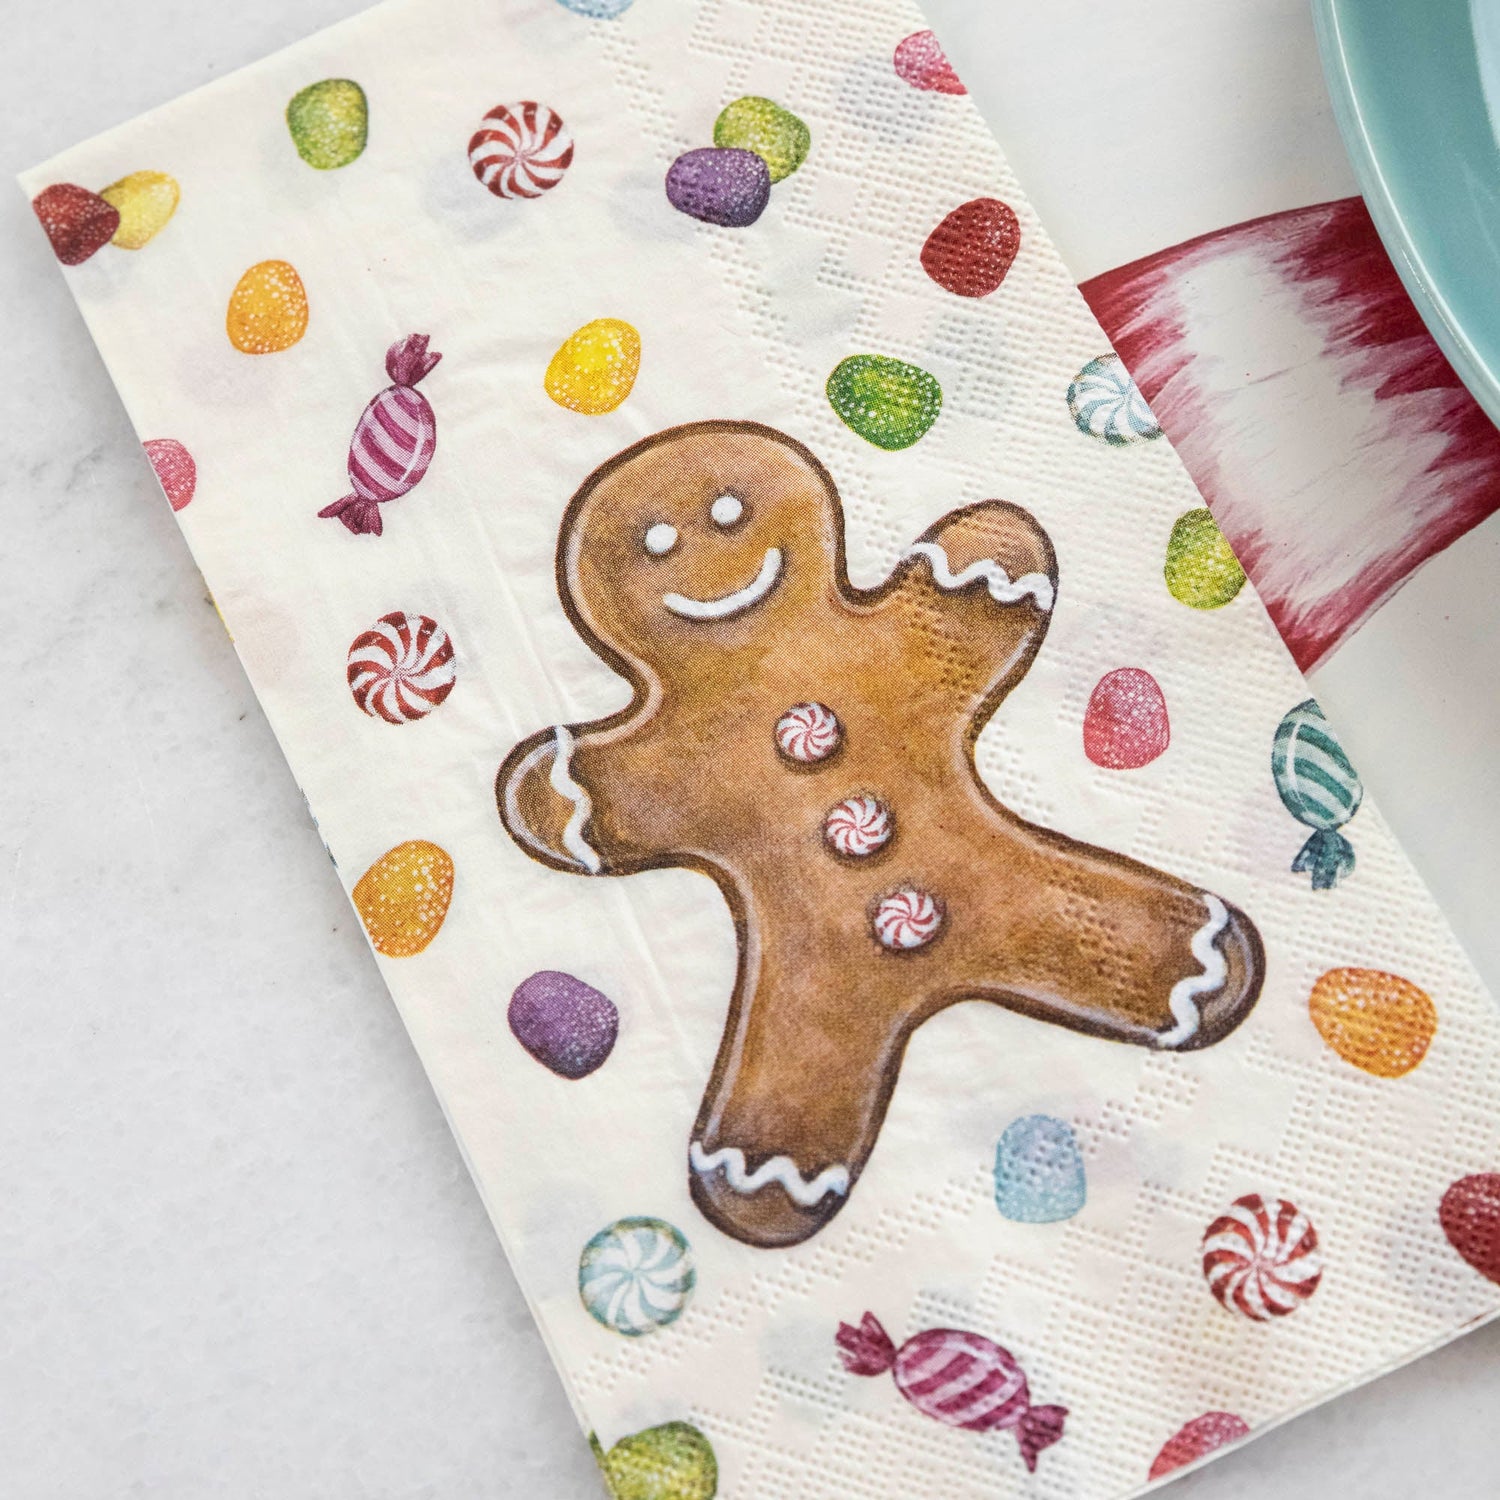 Close-up of a Gingerbread Guest Napkin next to a plate in a Christmas candy-themed place setting.